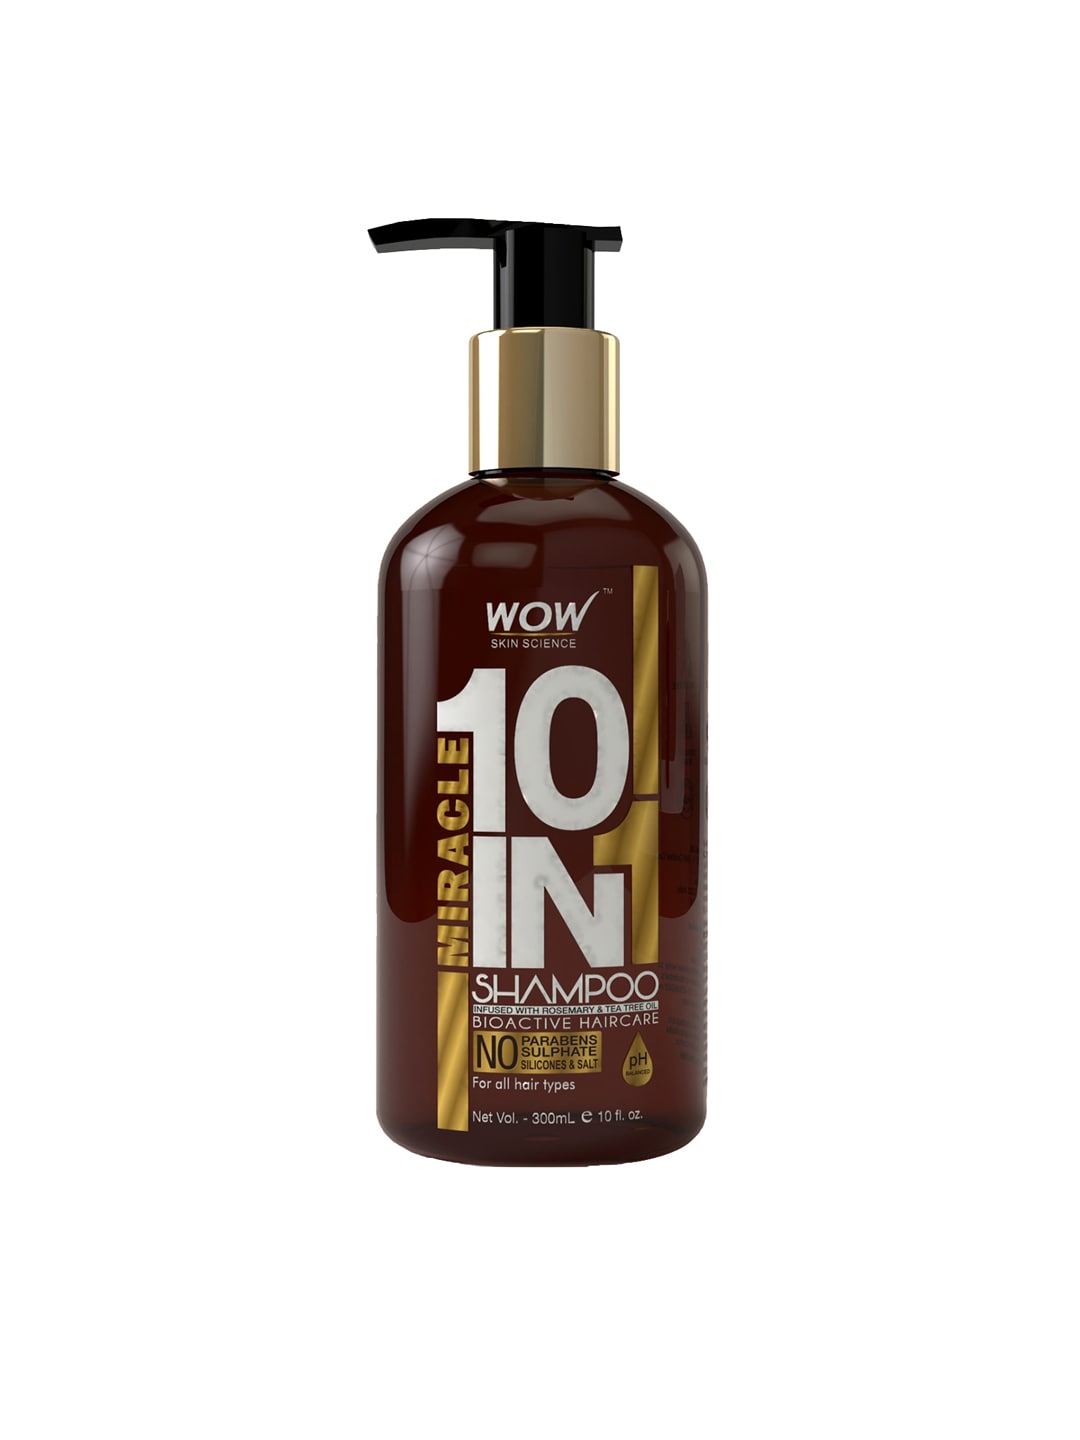 WOW Skin Science Miracle 10 in 1 Shampoo 300 ml Price in India